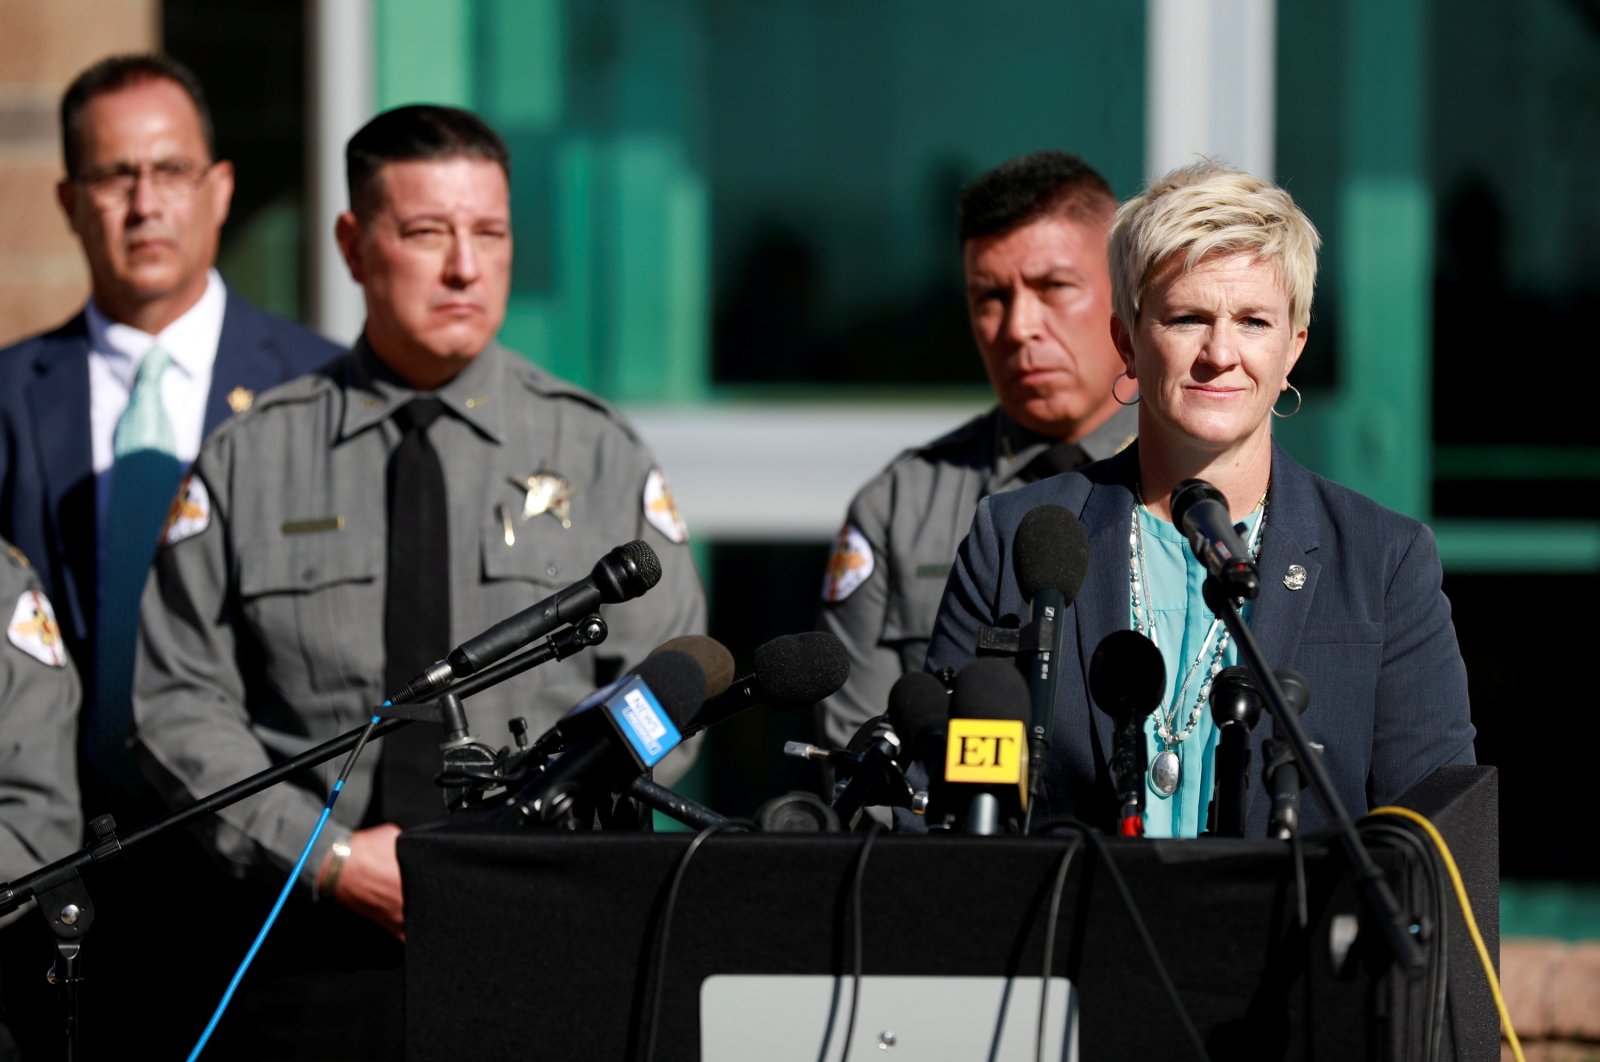 District attorney Mary Carmack-Altwies speaks at a news conference after actor Alec Baldwin accidentally shot and killed cinematographer Halyna Hutchins on the set of the film "Rust," in Santa Fe, New Mexico, U.S., Oct. 27, 2021. (Reuters Photo)